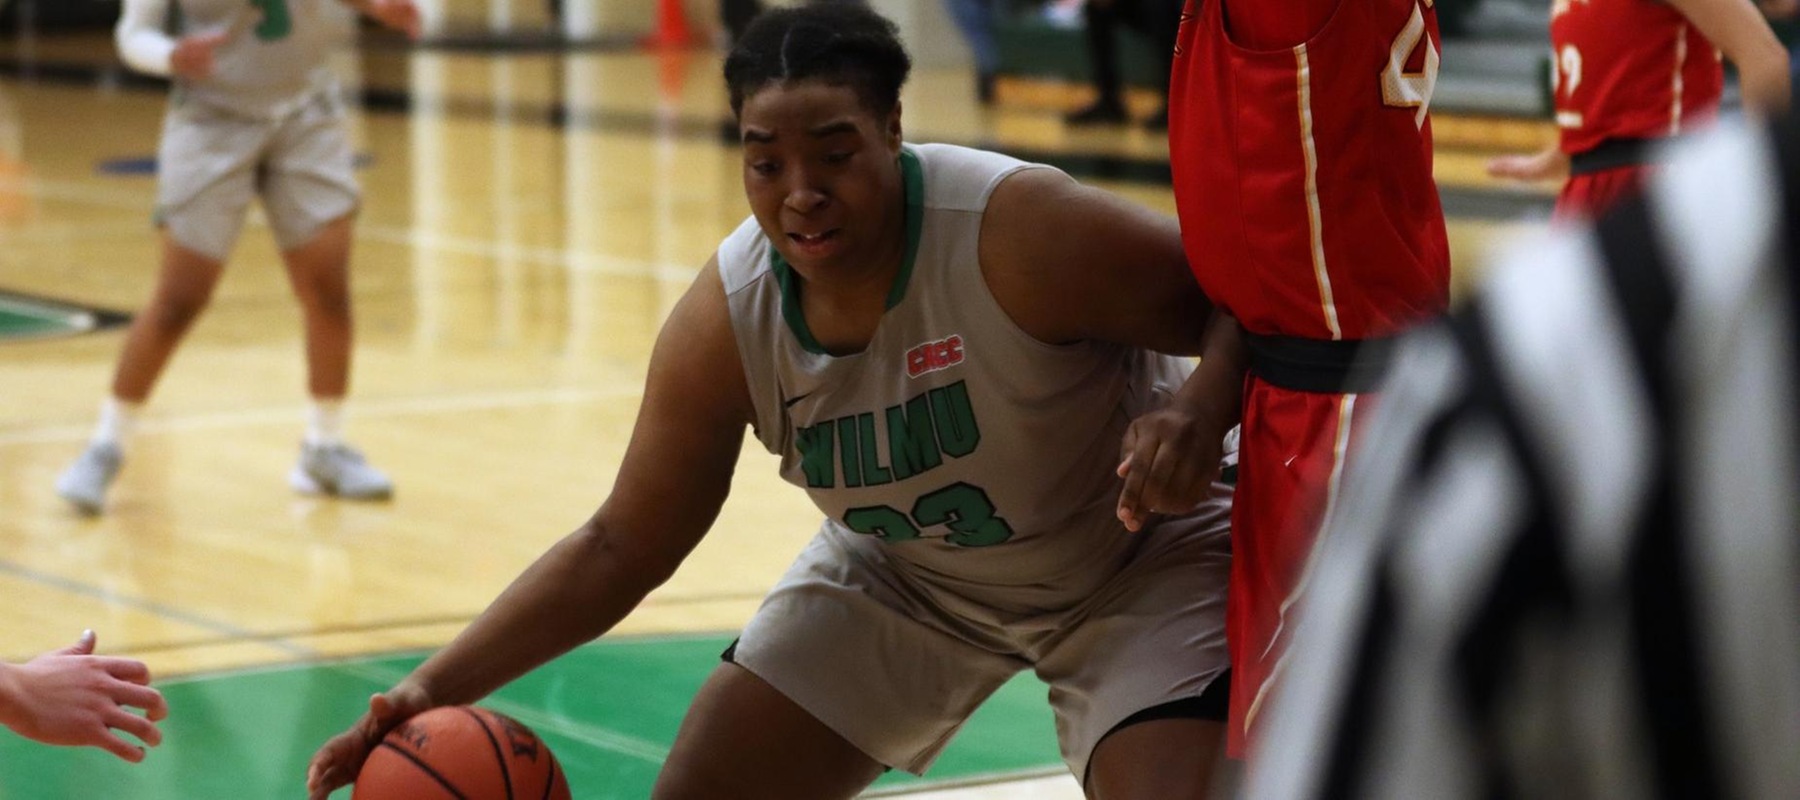 File photo of Sabreen Muslim who tallied a double-double with 24 points and 12 rebounds at Staten Island. Copyright 2020. Wilmington University. All rights reserved. Photo by Dan Lauletta. February 4, 2020 vs. Chestnut Hill.